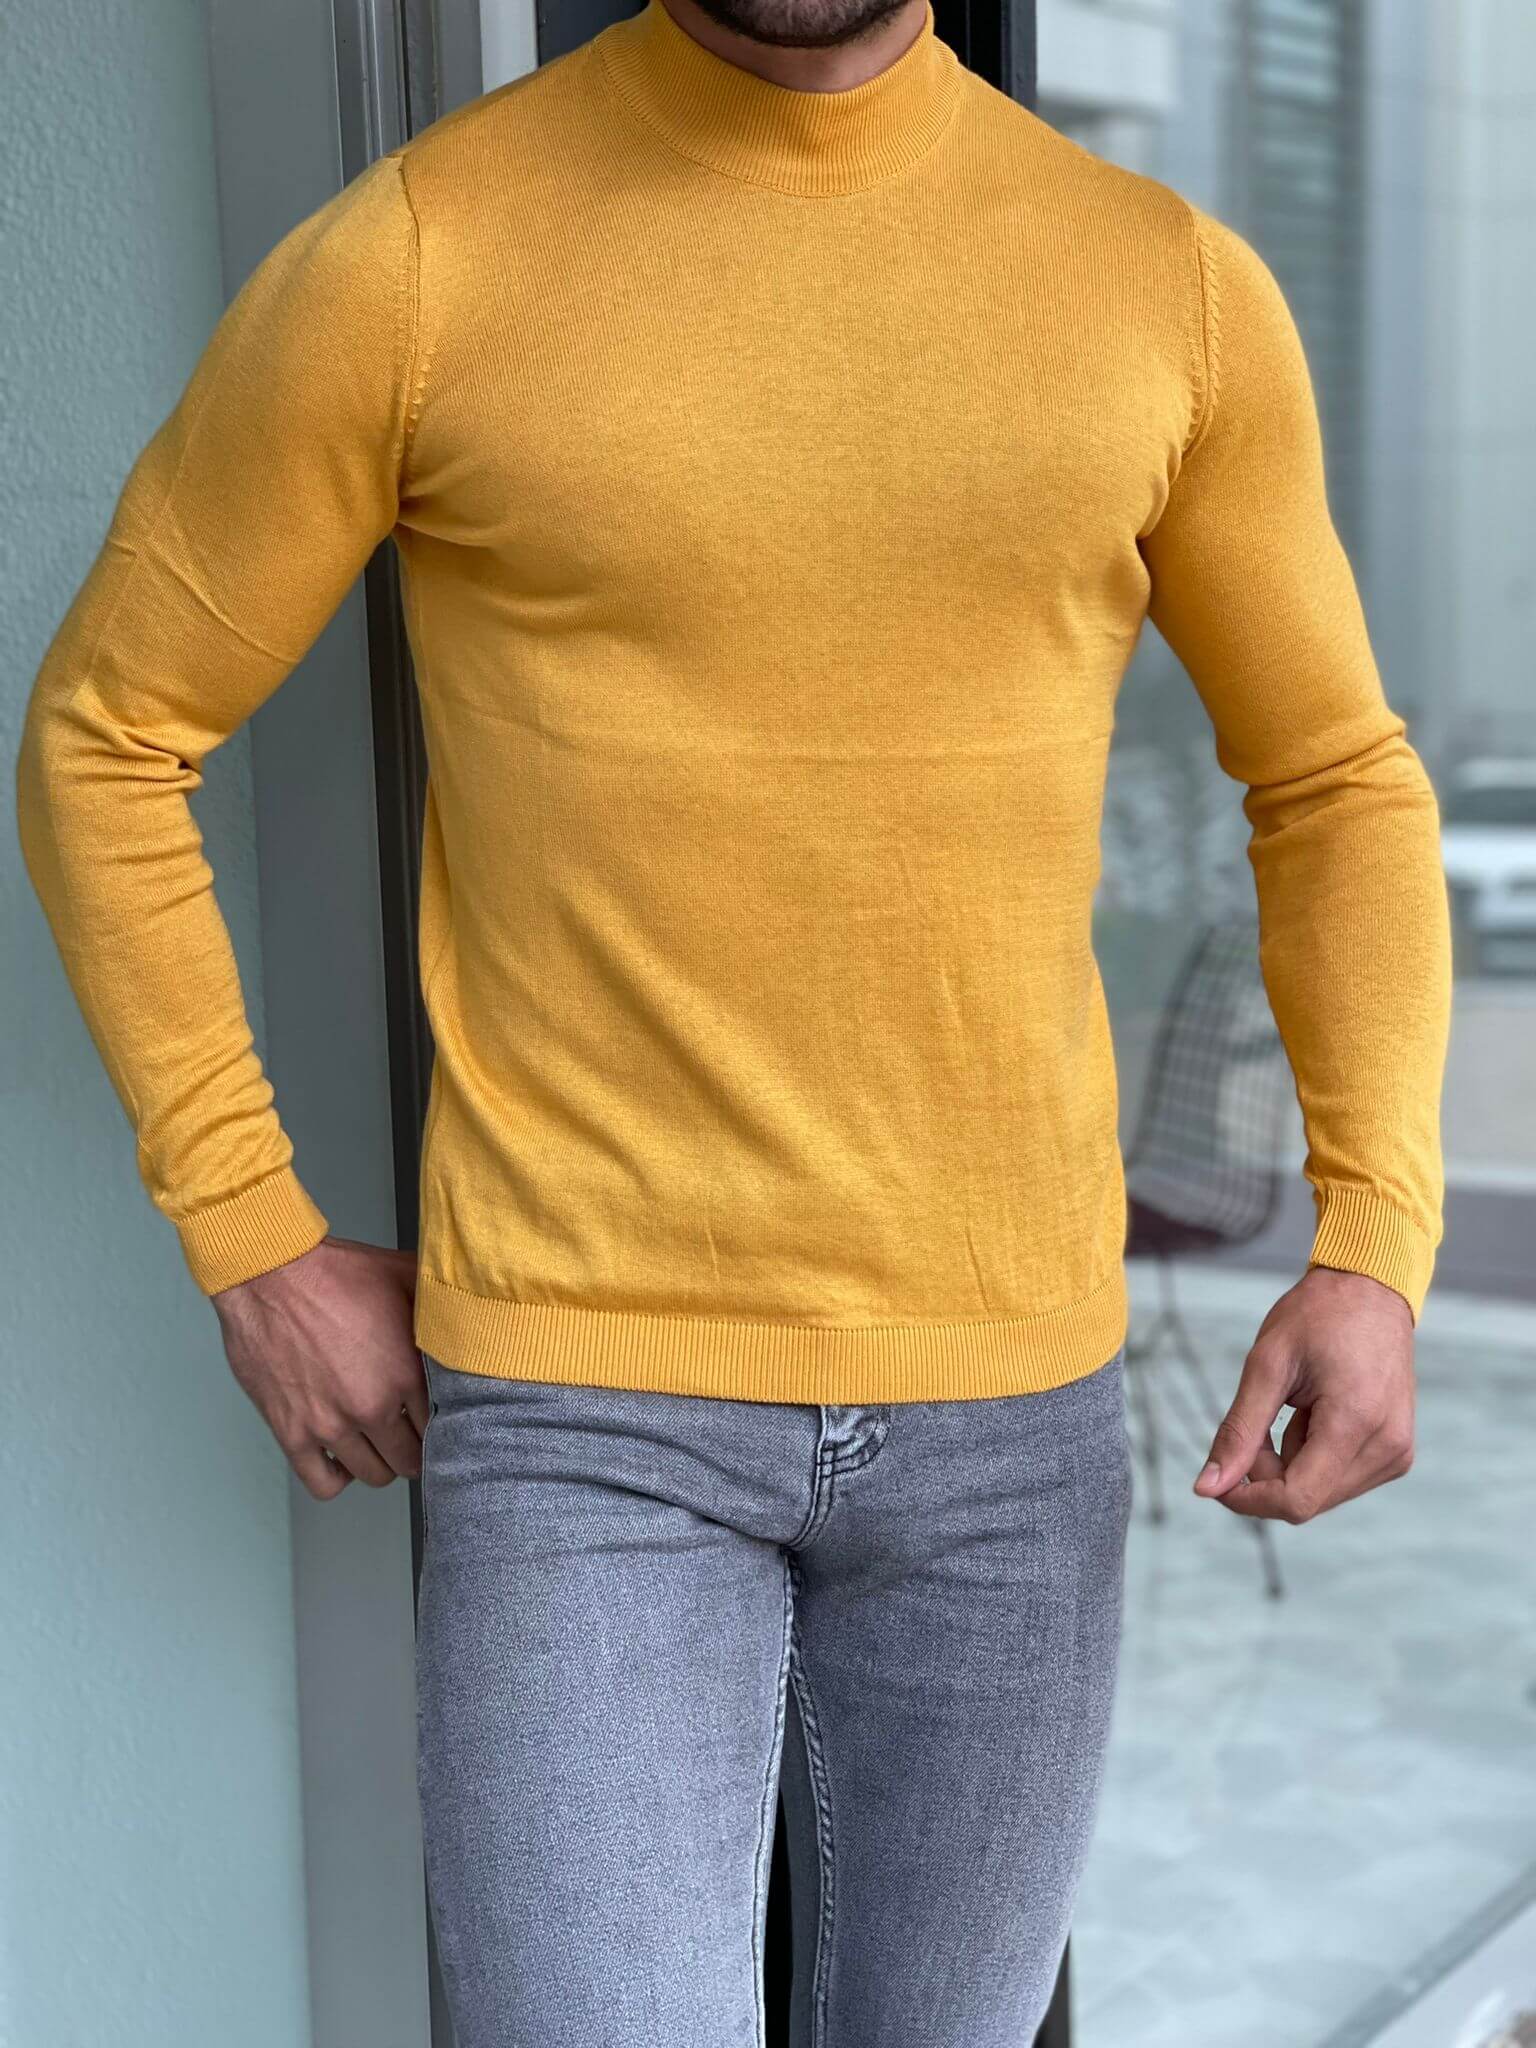 "An Osaka Mustard Half Turtleneck sweater, featuring a warm mustard color, a cozy half turtleneck collar, and a stylish design perfect for cooler weather."